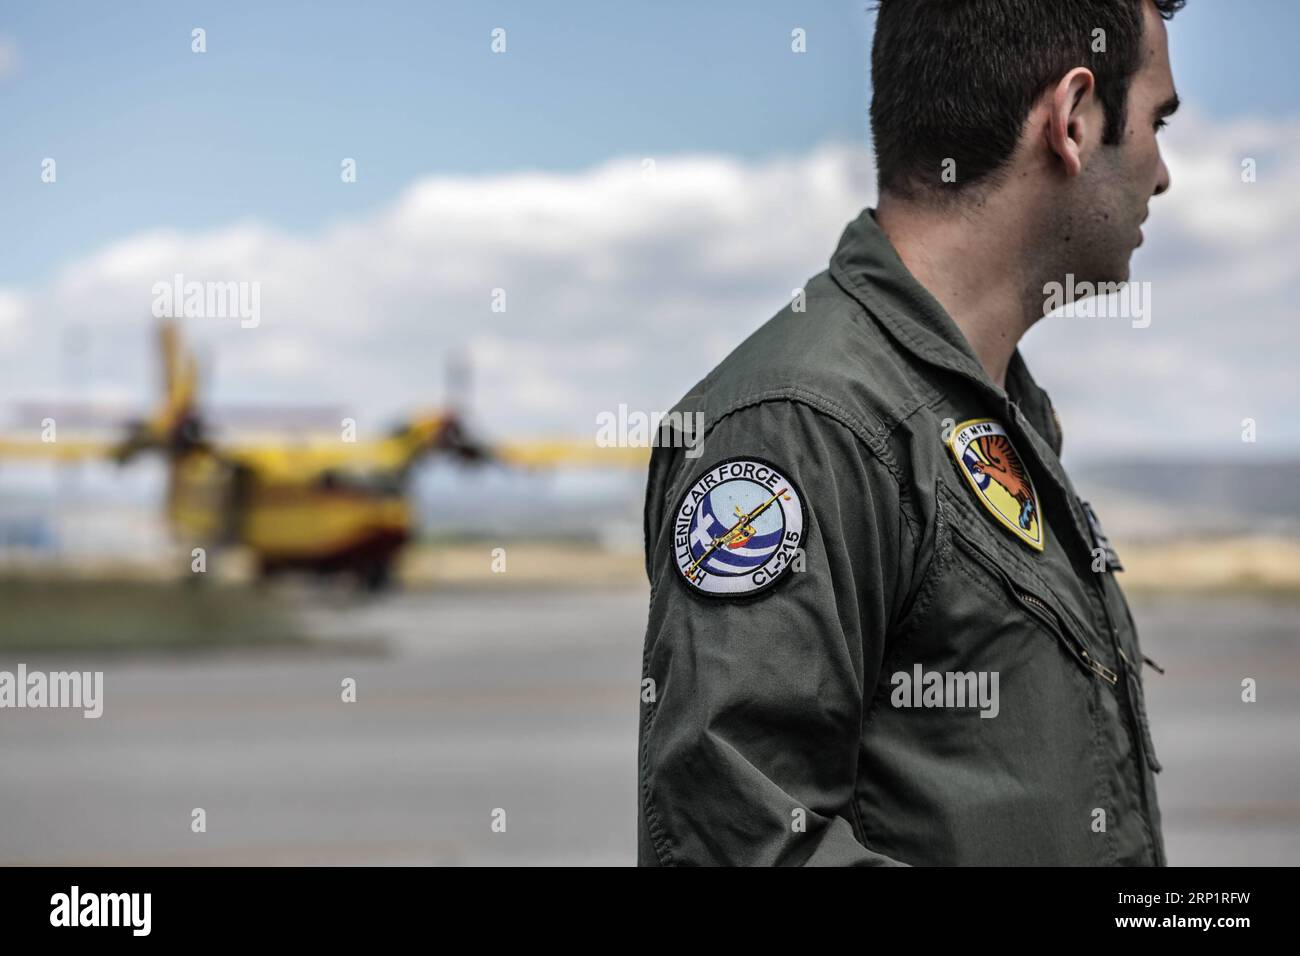 (180721) -- ATHENS, July 21, 2018 -- Photo taken on July 20, 2018 shows a pilot in front of a firefighting aircraft of 355 Tactical Transport Squadron at Elefsina Air Base, Athens, Greece. The 355 Tactical Transport Squadron was established in 1947 to fight wildfires. ) (zcc) GREECE-ATHENS-FIREFIGHTING SQUADRON LefterisxPartsalis PUBLICATIONxNOTxINxCHN Stock Photo